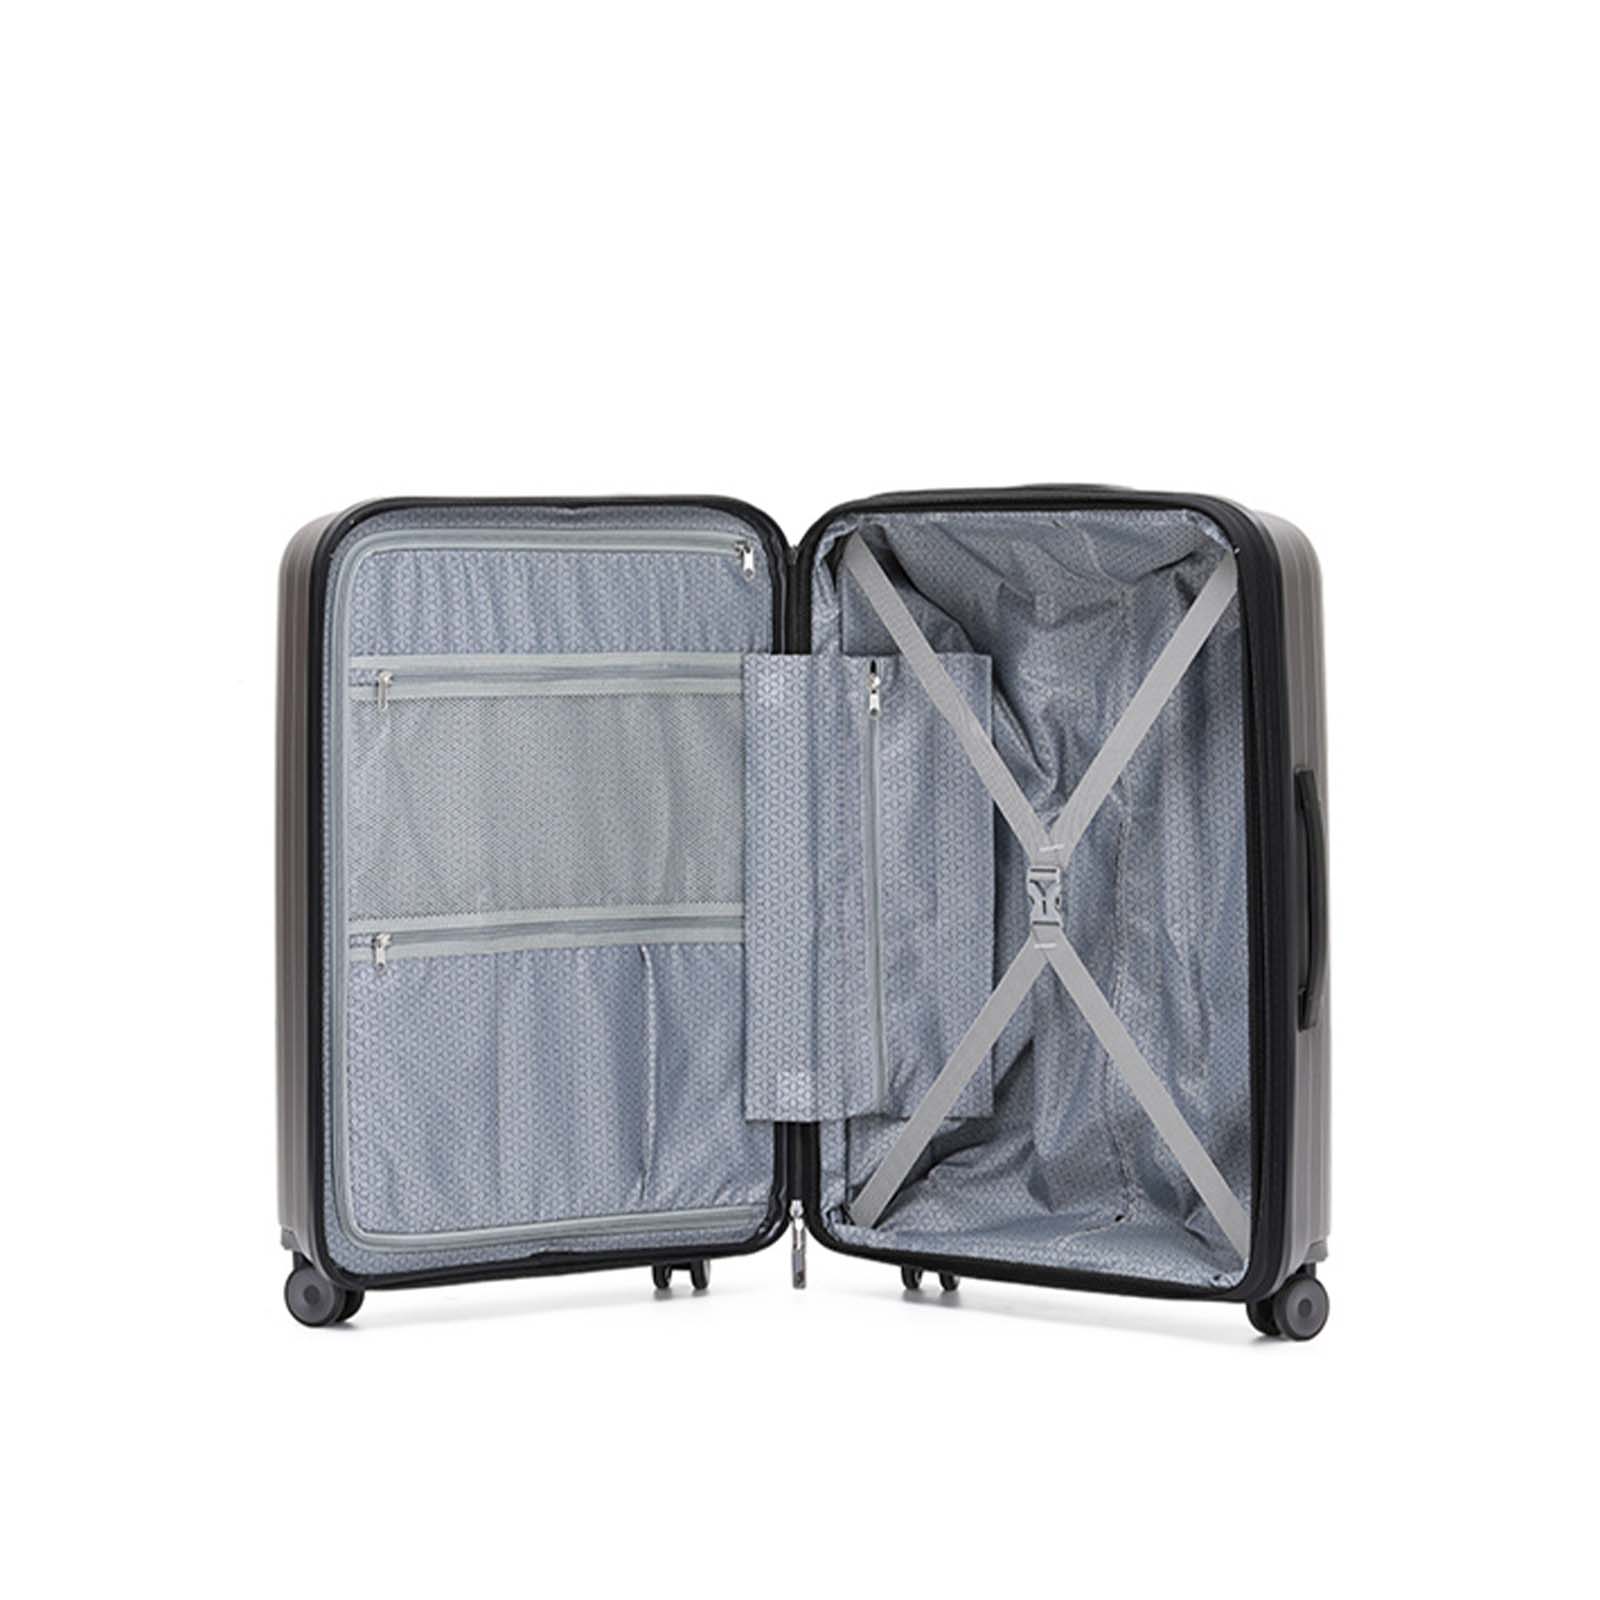 tosca-eclipse-4-wheel-67cm-carry-on-suitcase-charcoal-open